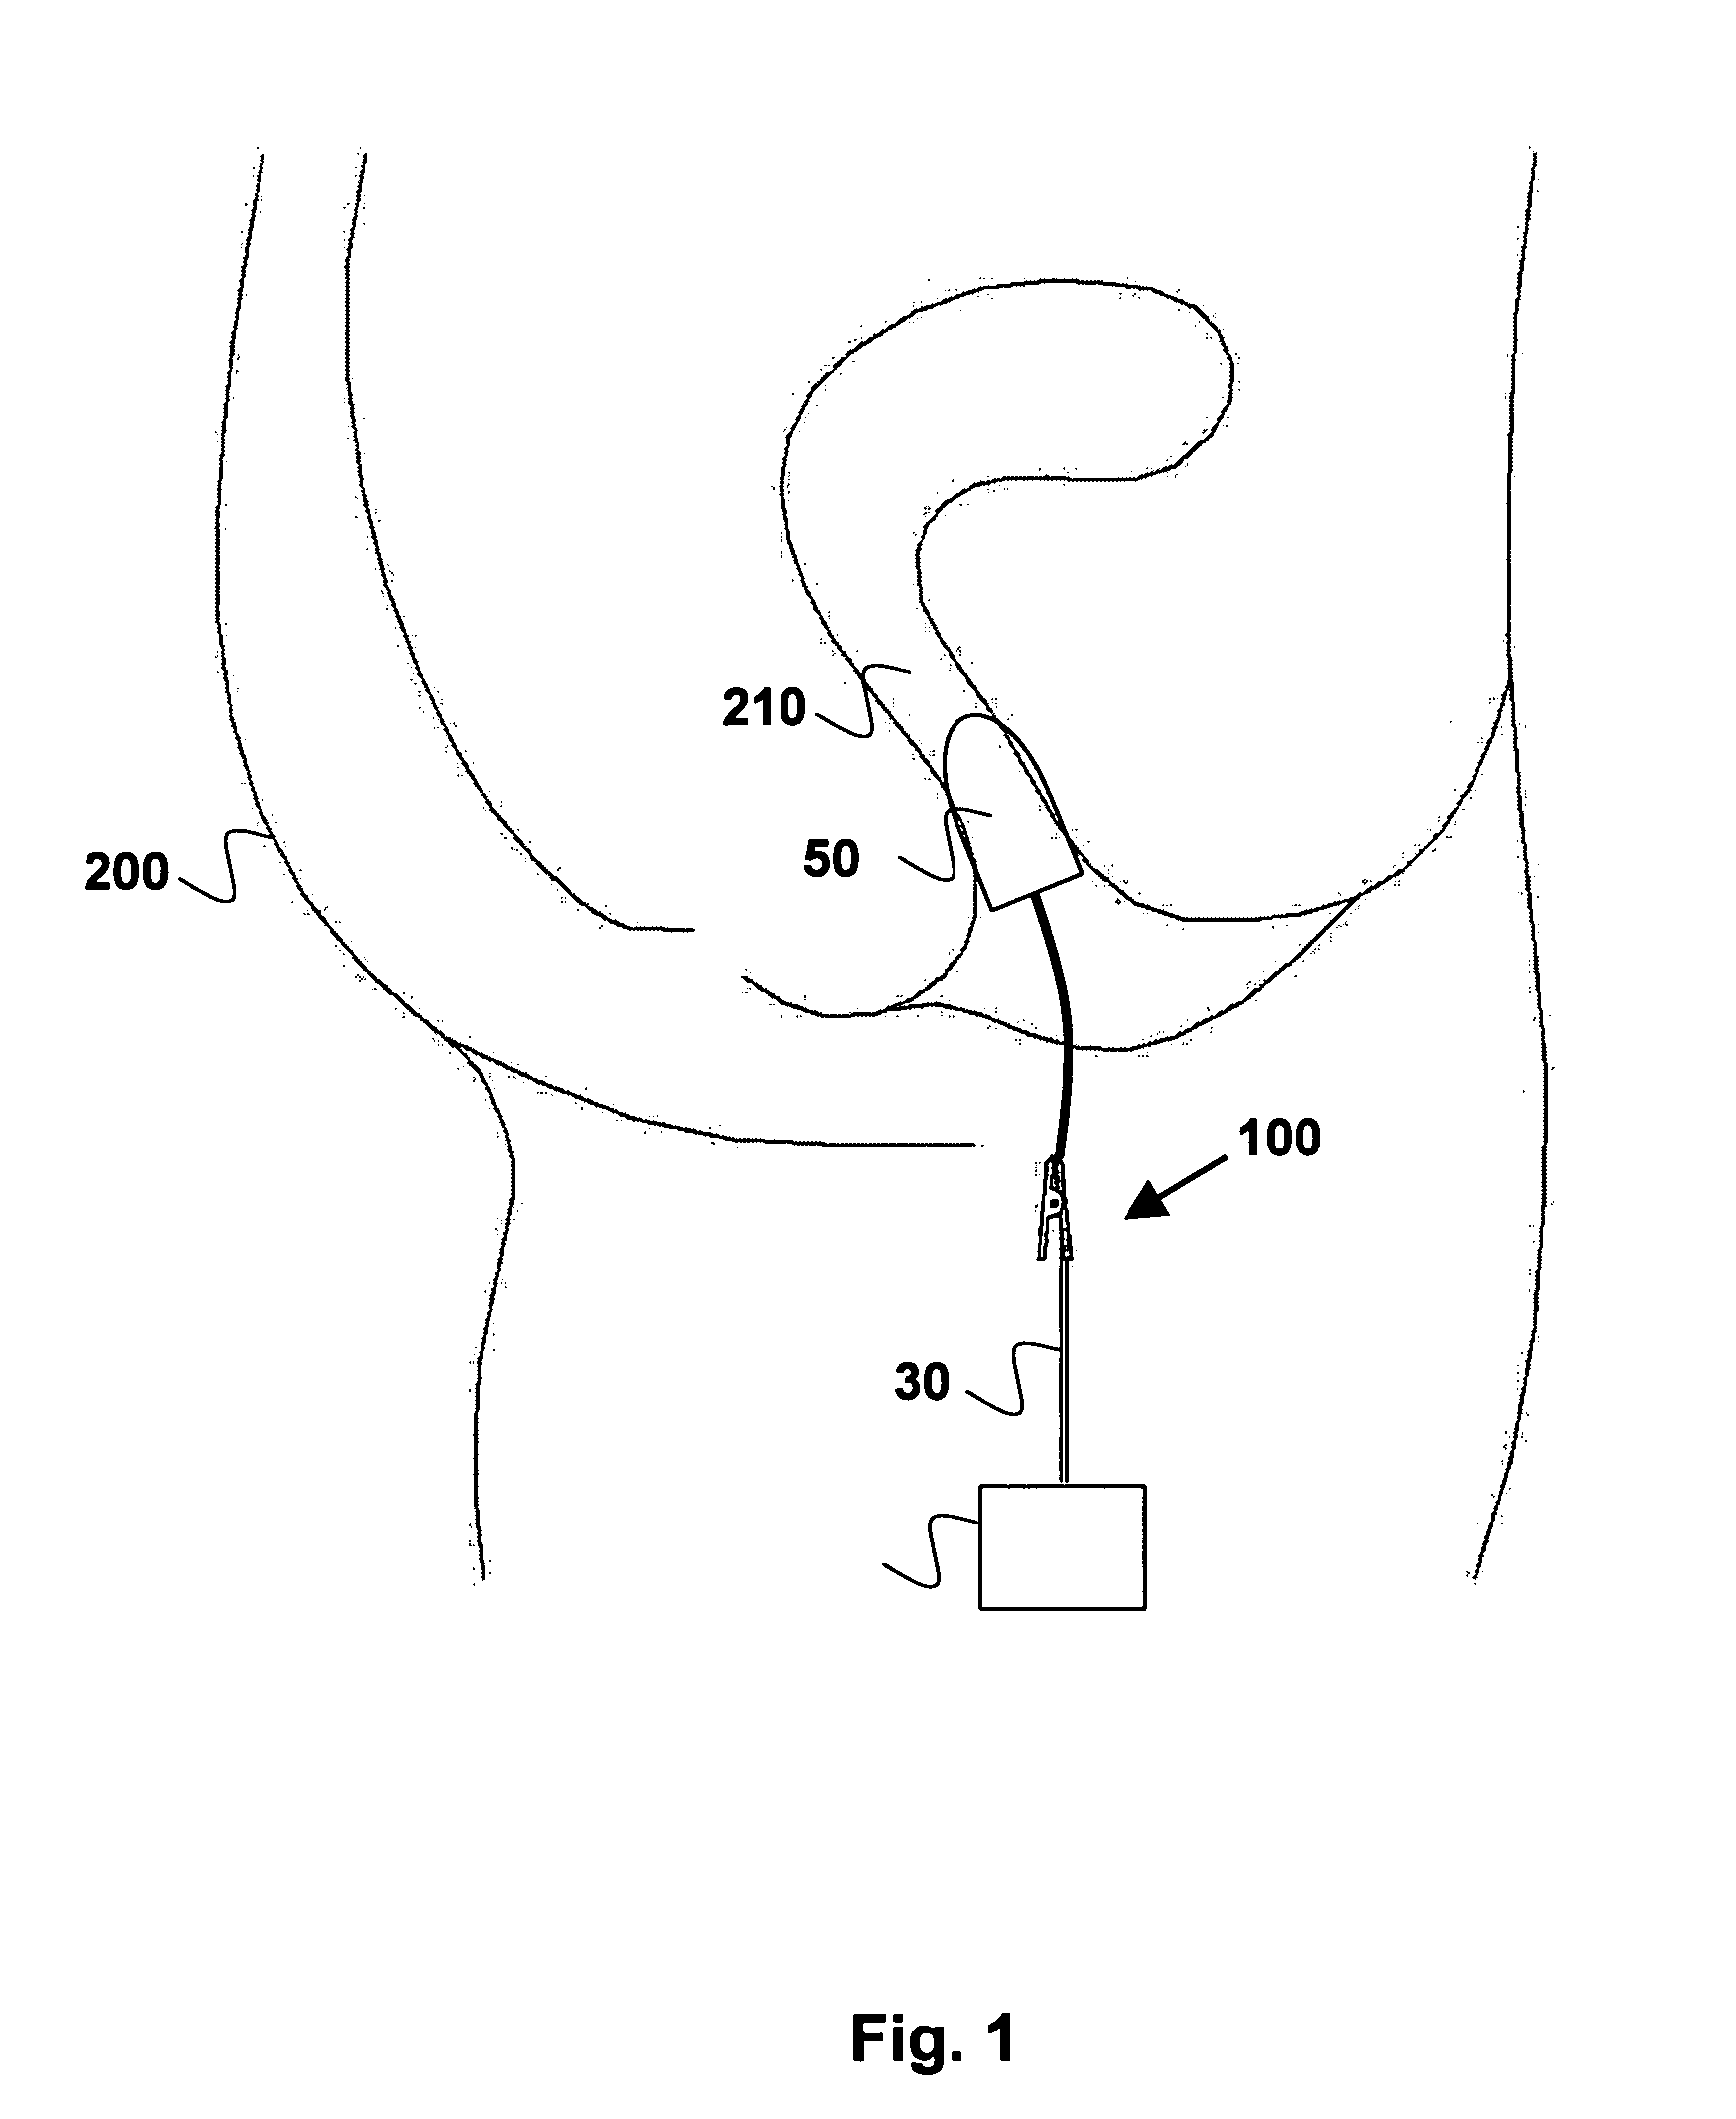 Method and apparatus for exercising pelvic floor muscles